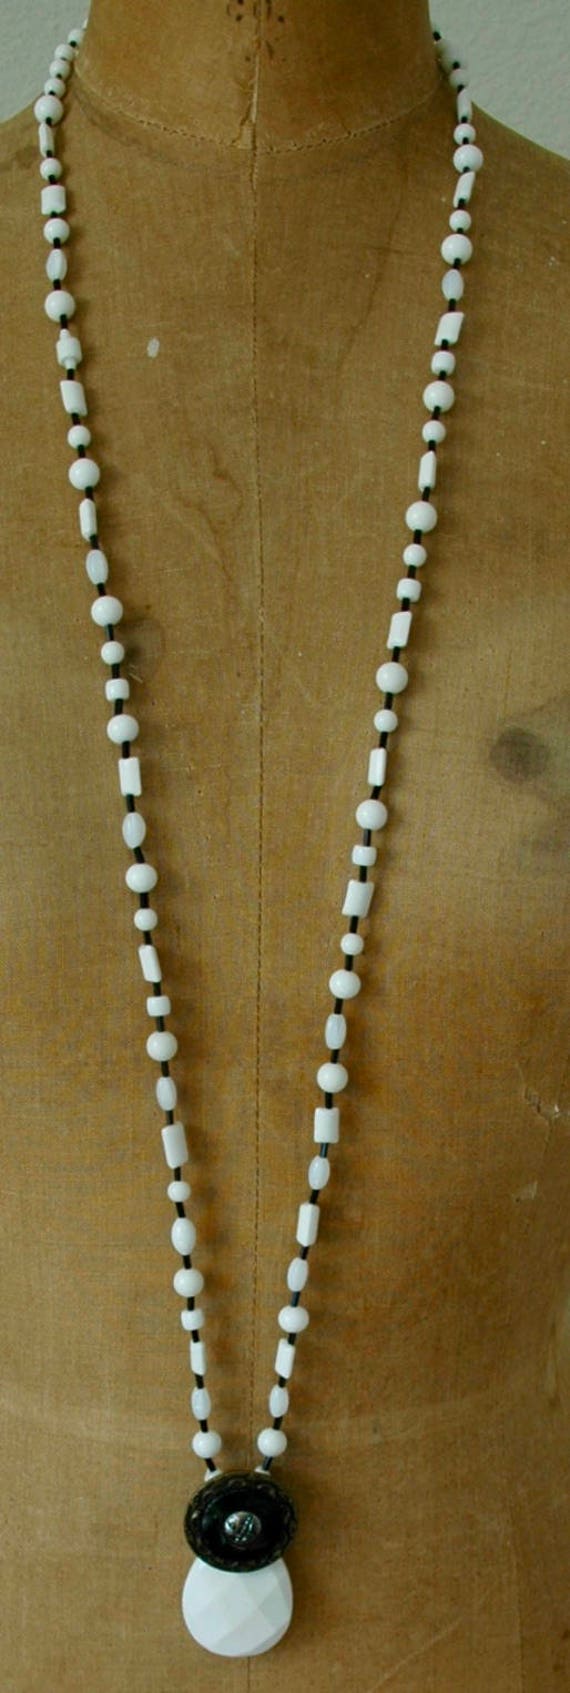 Long Black and White Glass Bead Necklace with Pen… - image 6